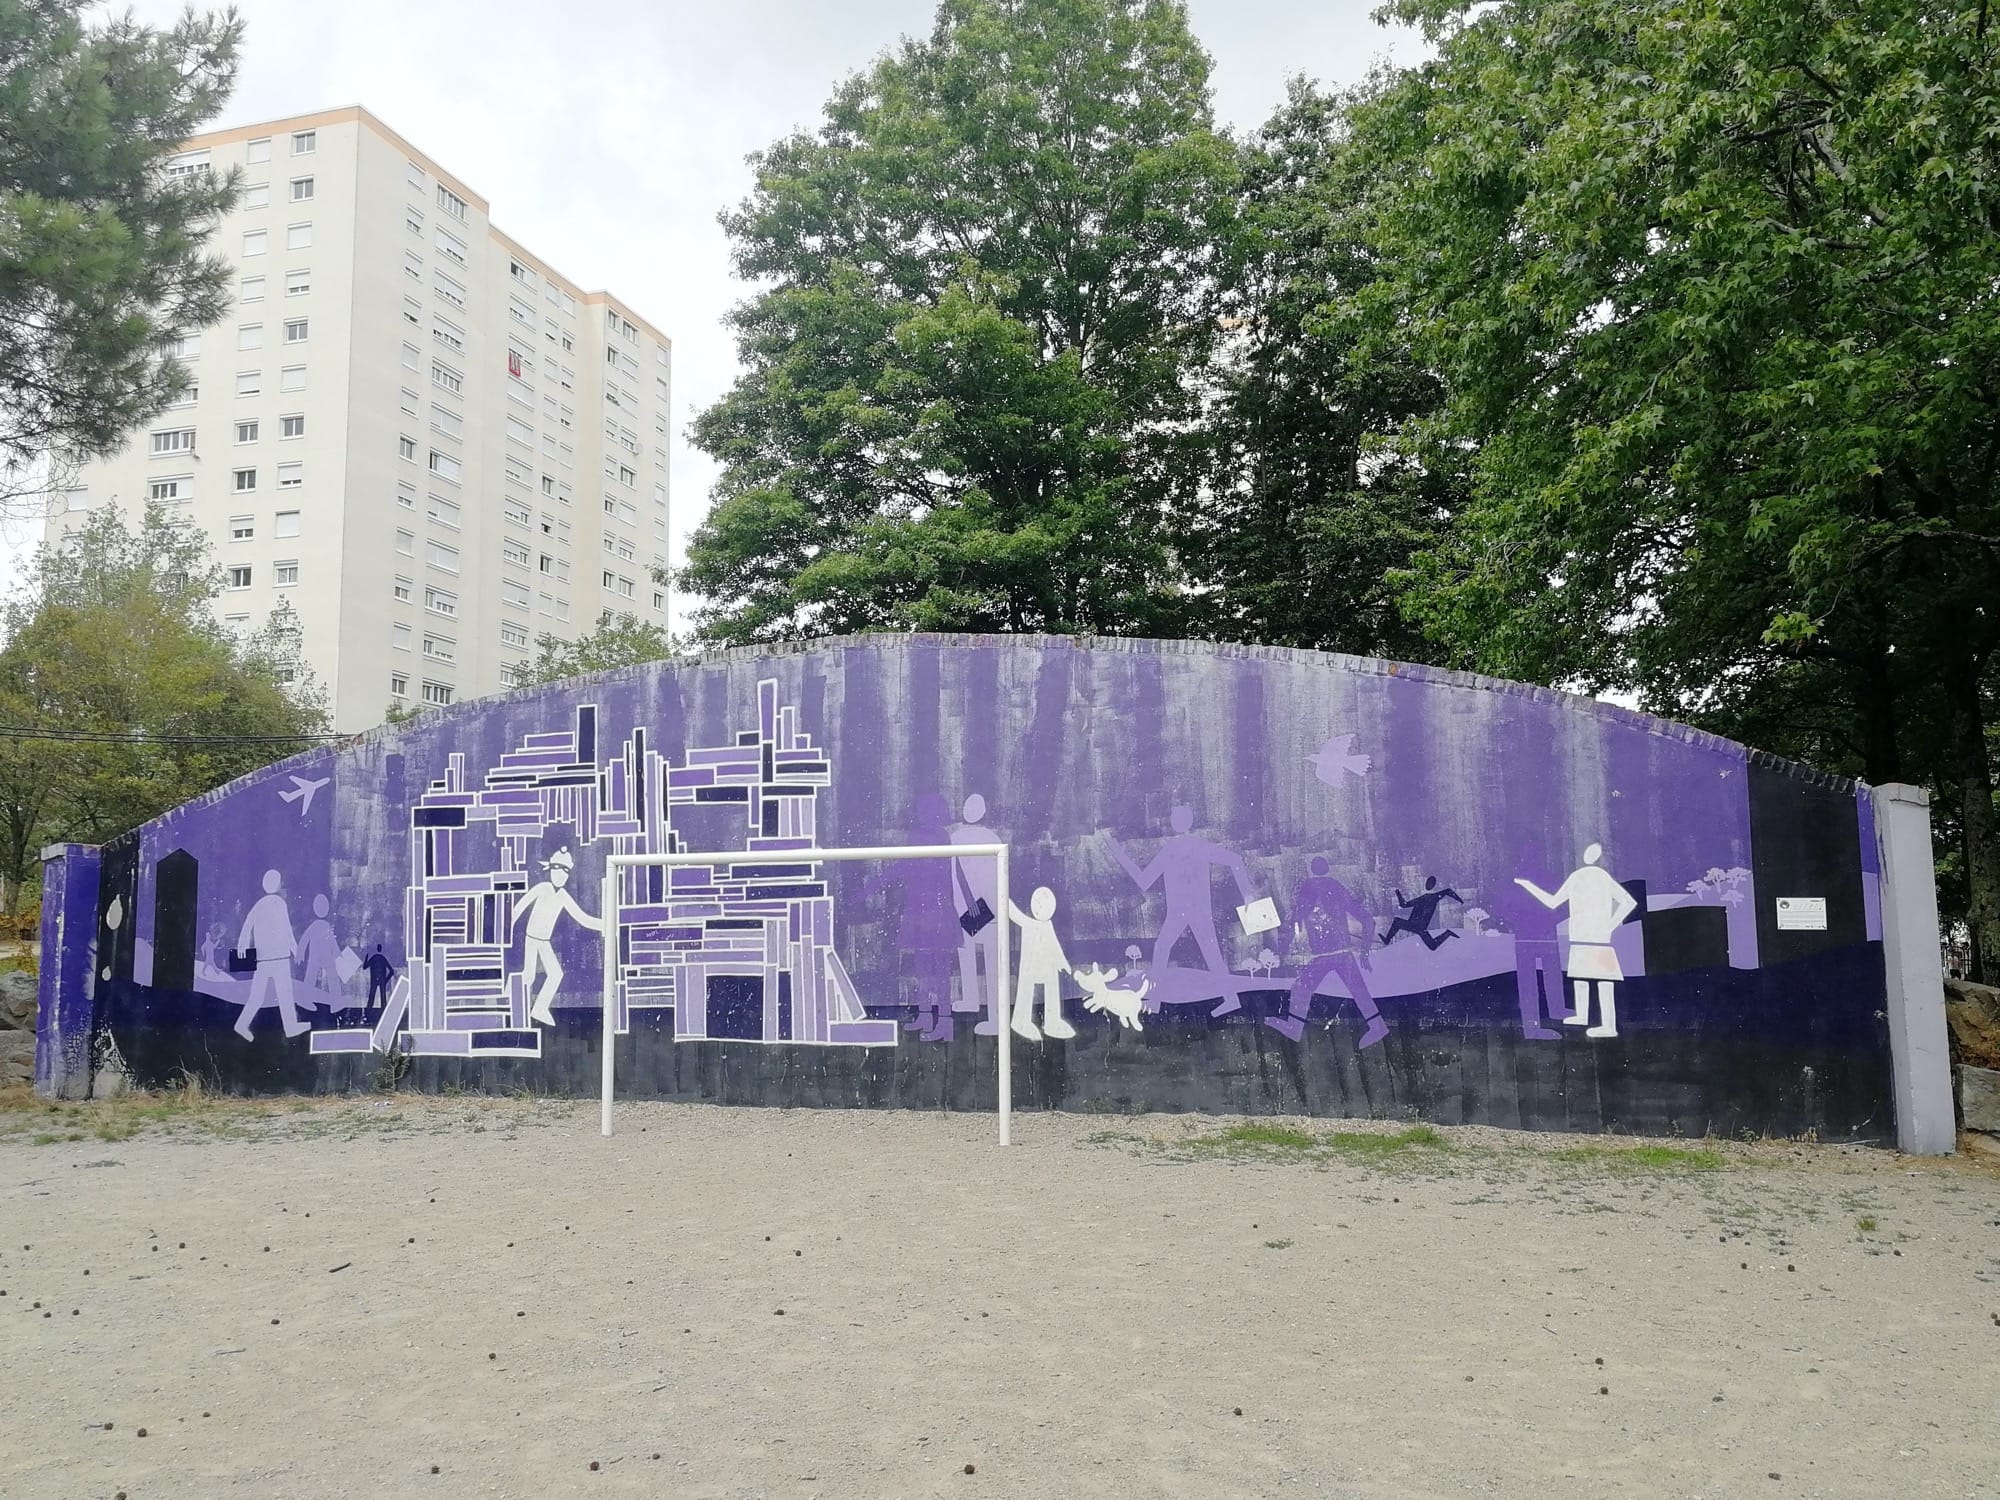 Graffiti 4264  captured by Rabot in Nantes France